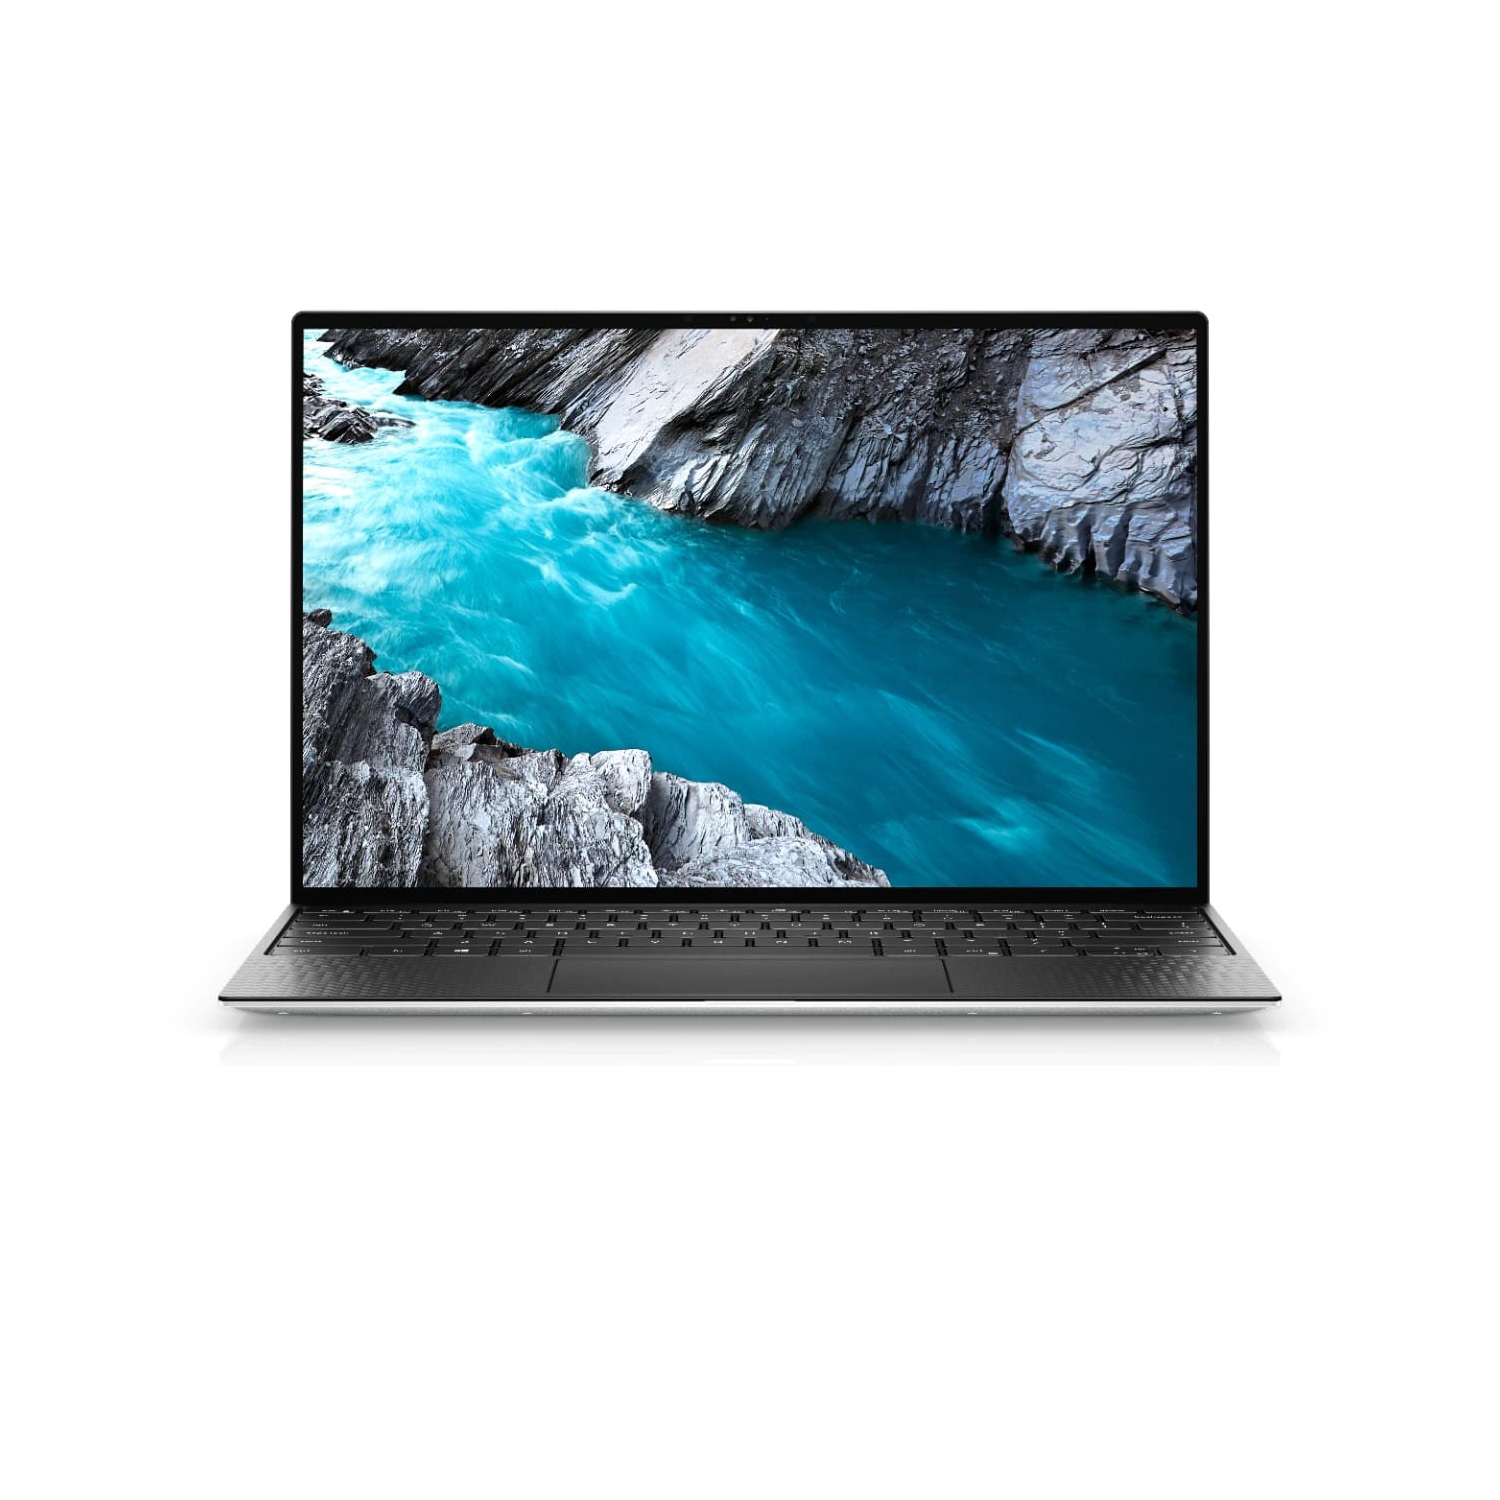 Refurbished (Excellent) - Dell XPS 13 9300 Laptop (2020) | 13.3" FHD+ | Core i7 - 256GB SSD - 8GB RAM | 4 Cores @ 3.9 GHz - 10th Gen CPU Certified Refurbished